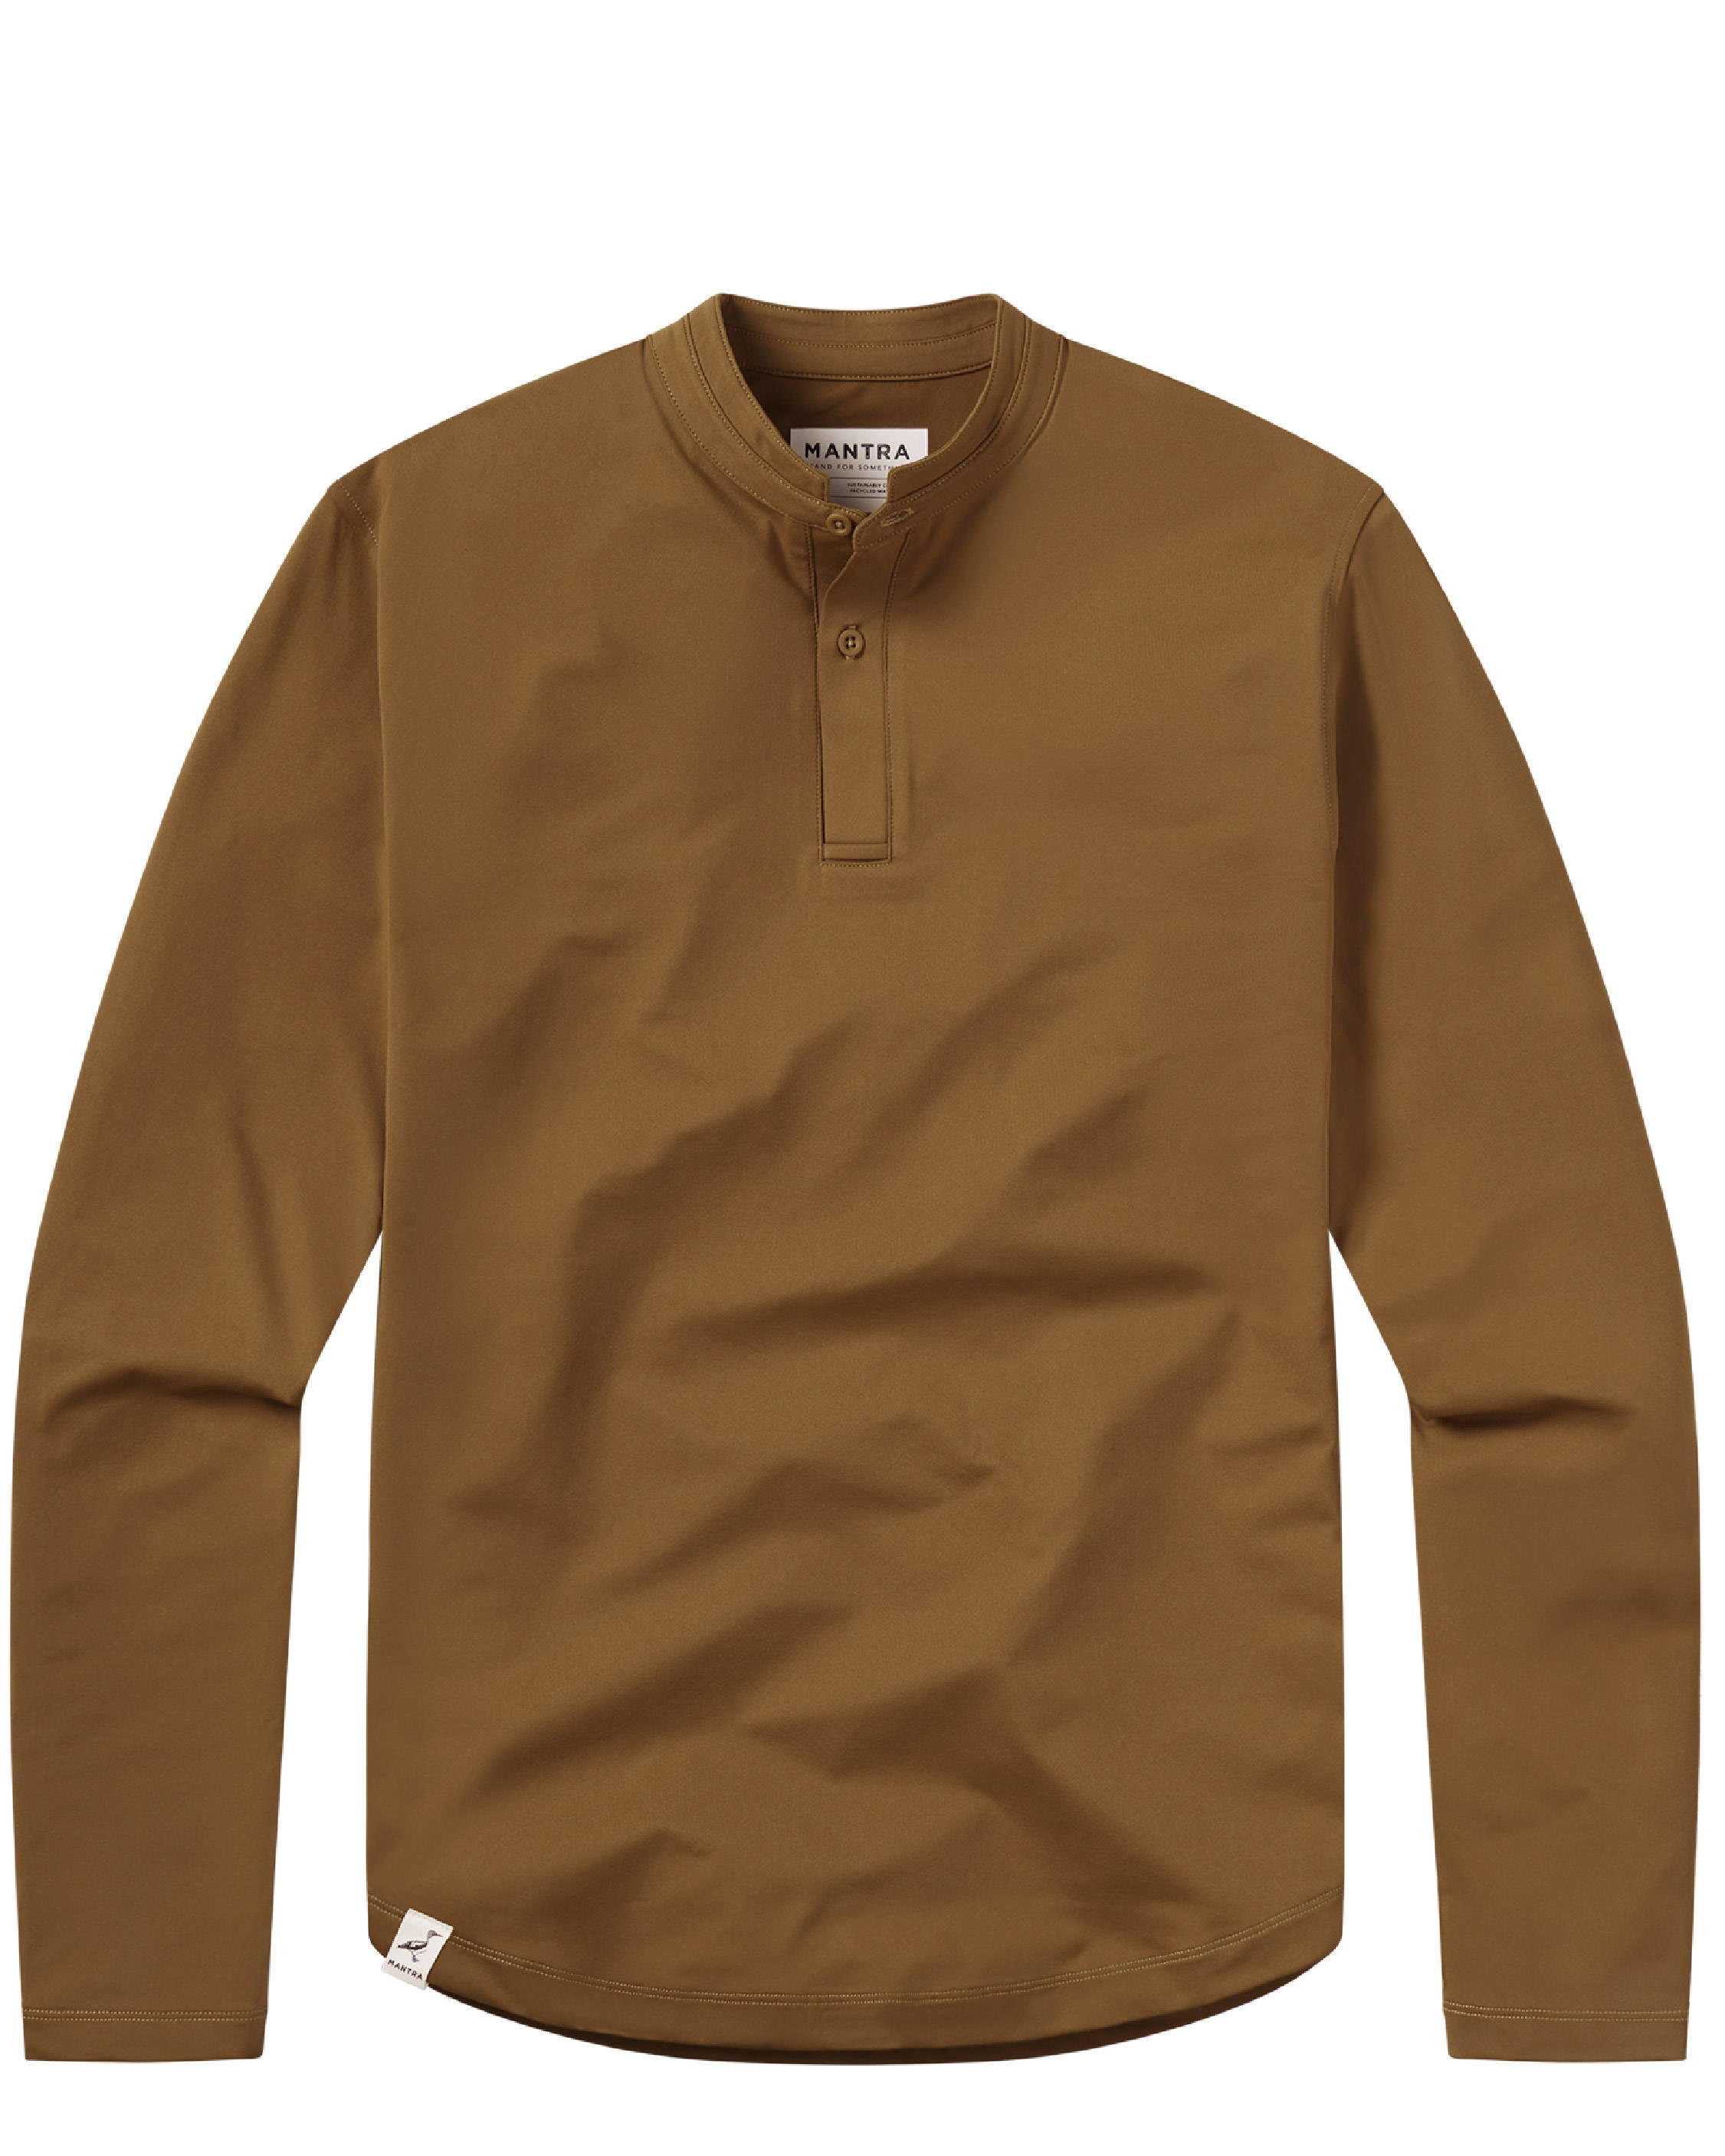 MANTRA BARK L/S Polo - sustainable mens performance polo made from recycled materials